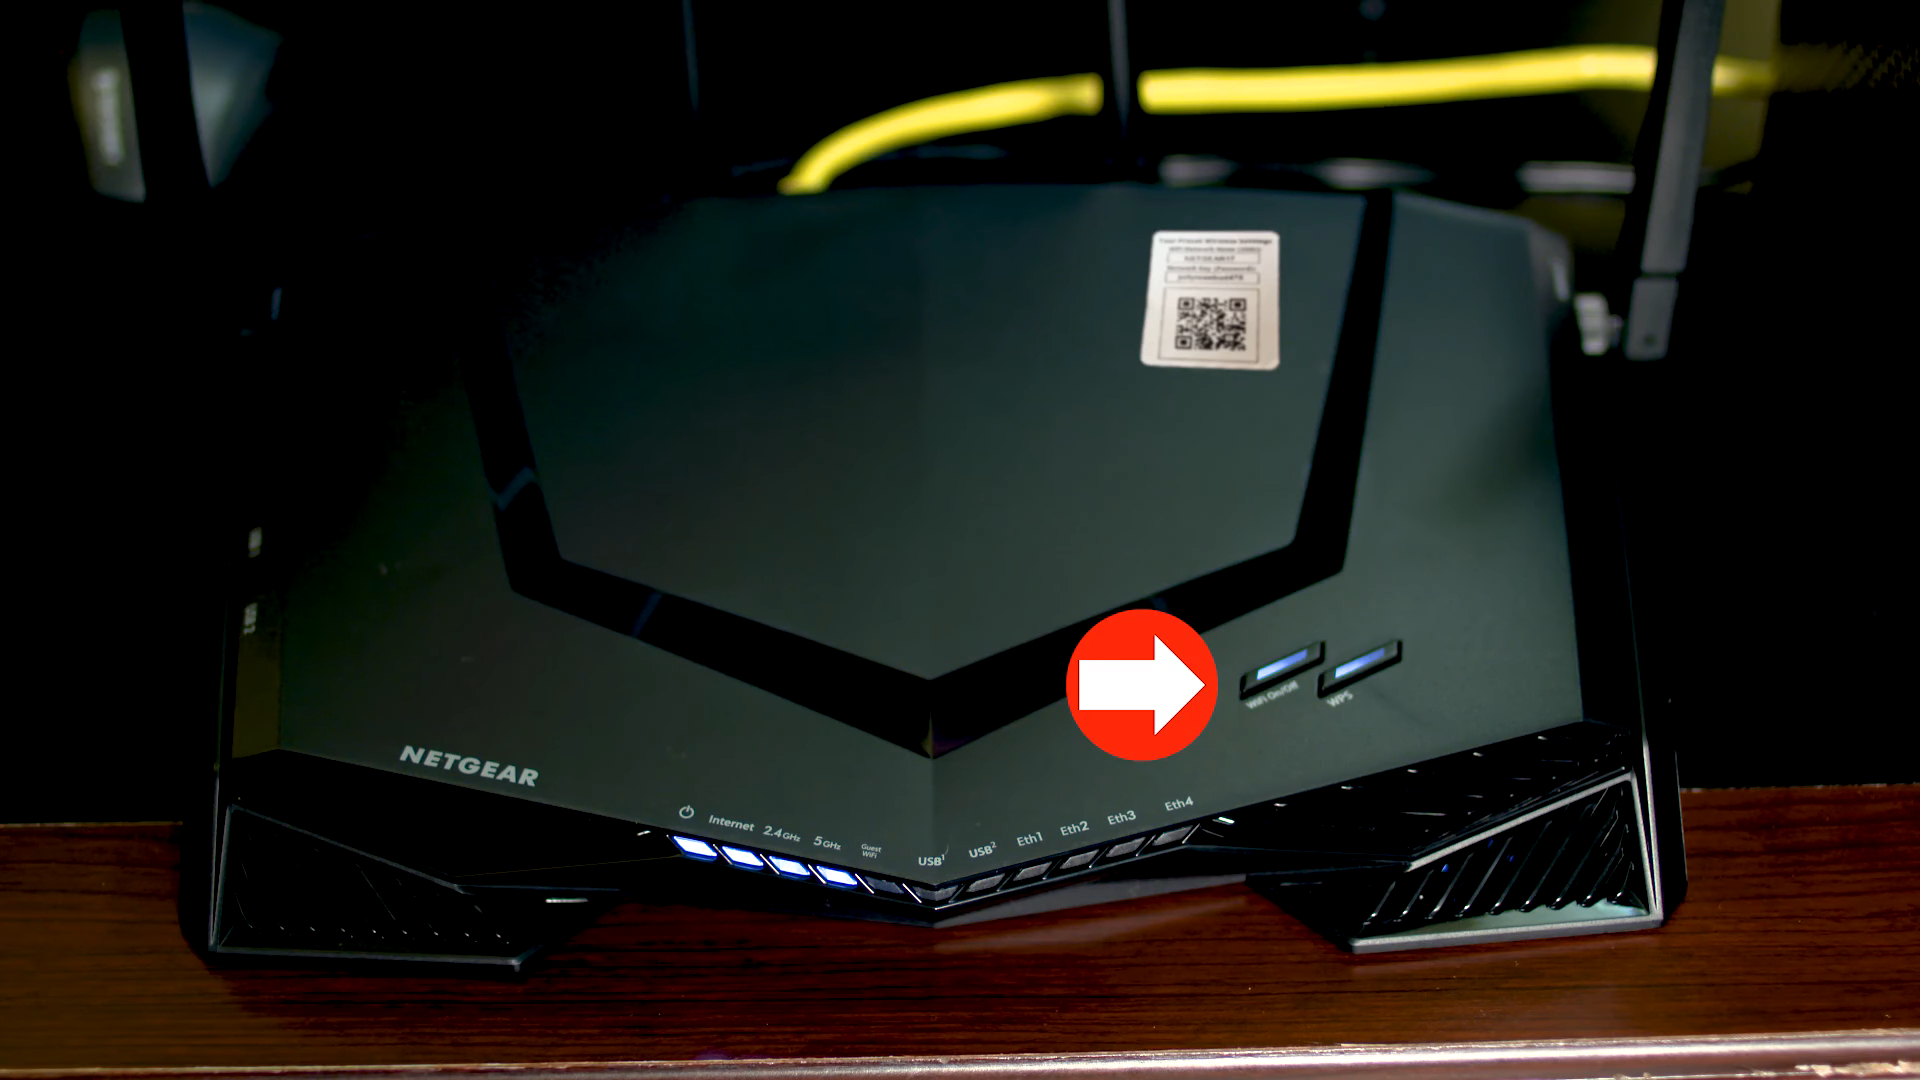 how-to-nergear-nighthawk-pro-gaming-xr500-router-easy-setup